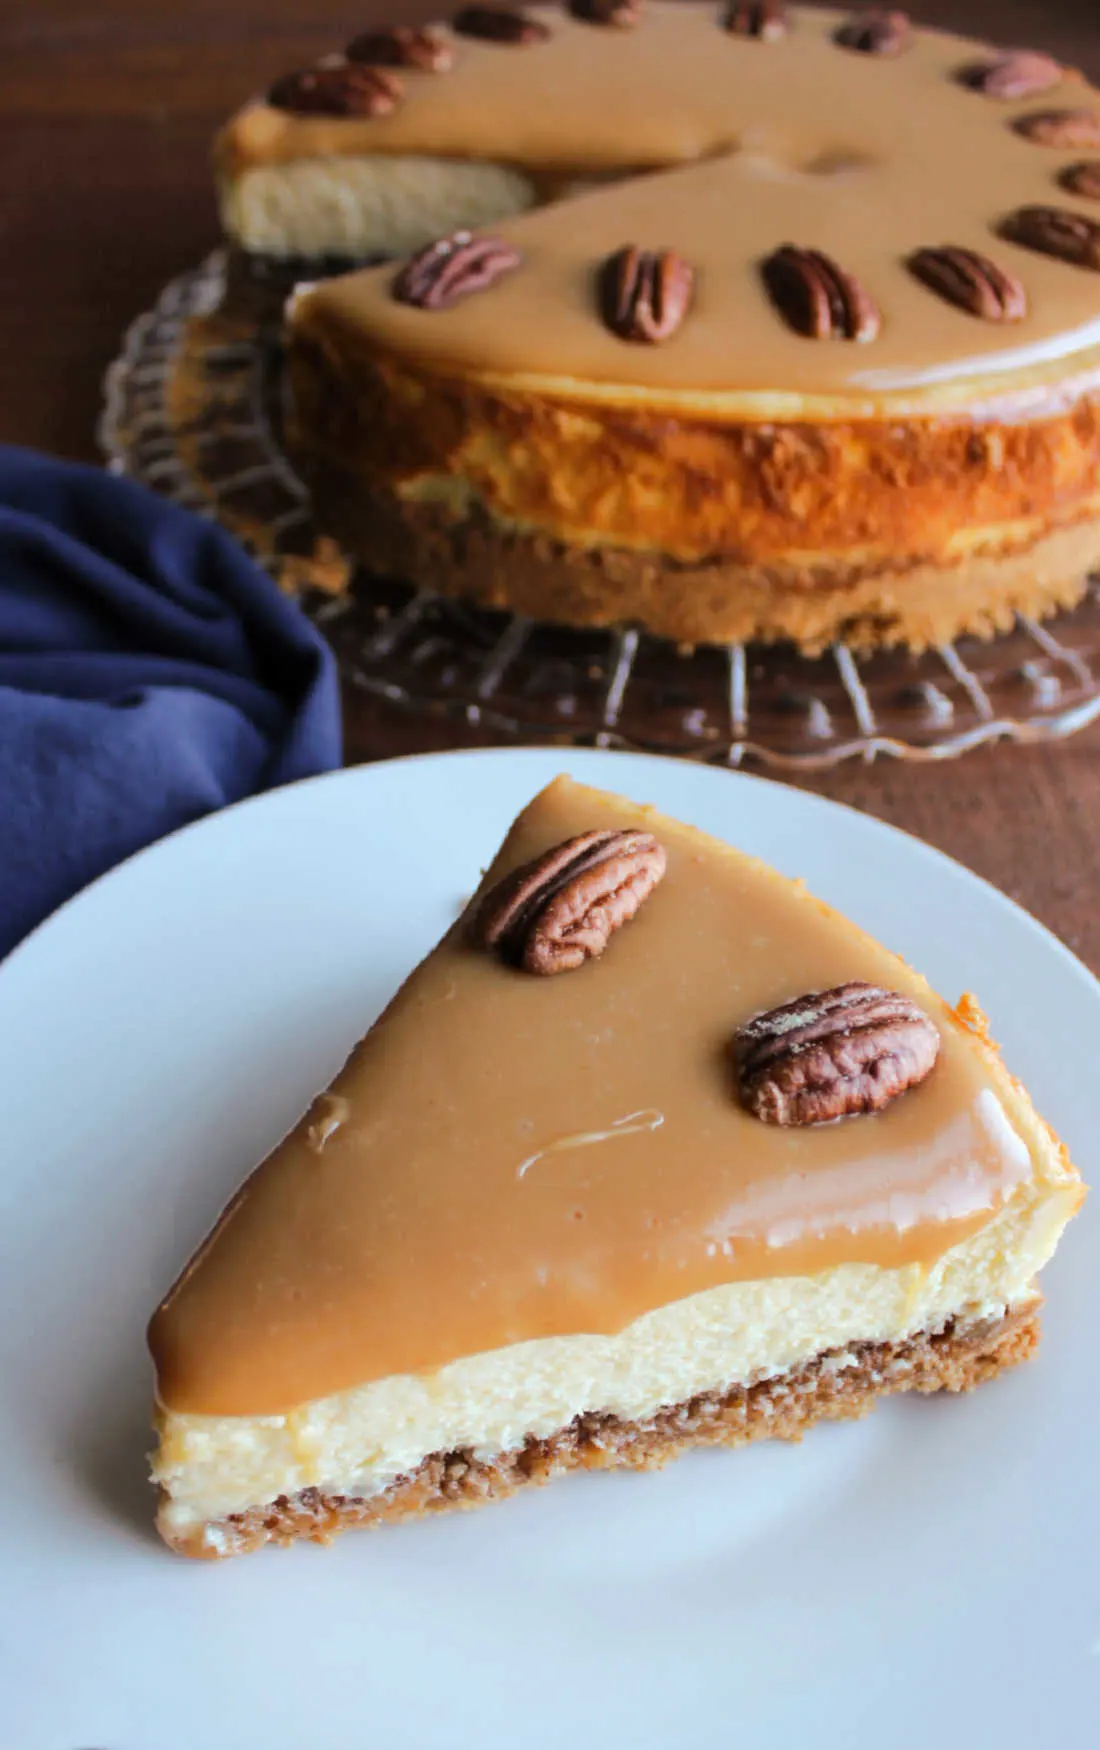 Looking down on a slice of cheesecake with a smooth caramel layer and pecans on top.